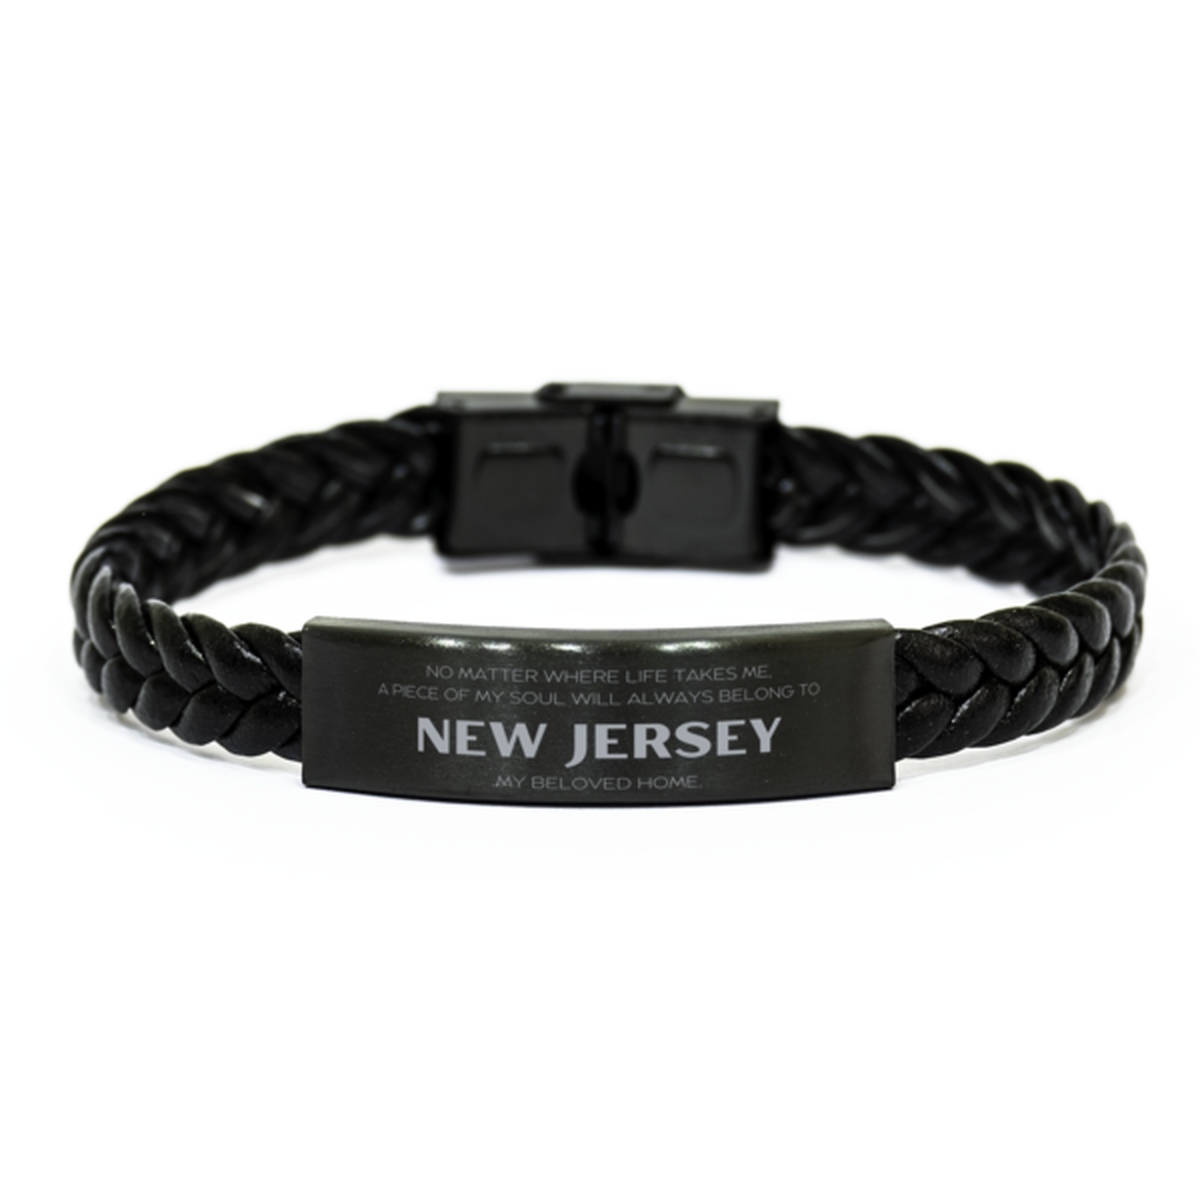 Love New Jersey State Gifts, My soul will always belong to New Jersey, Proud Braided Leather Bracelet, Birthday Unique Gifts For New Jersey Men, Women, Friends